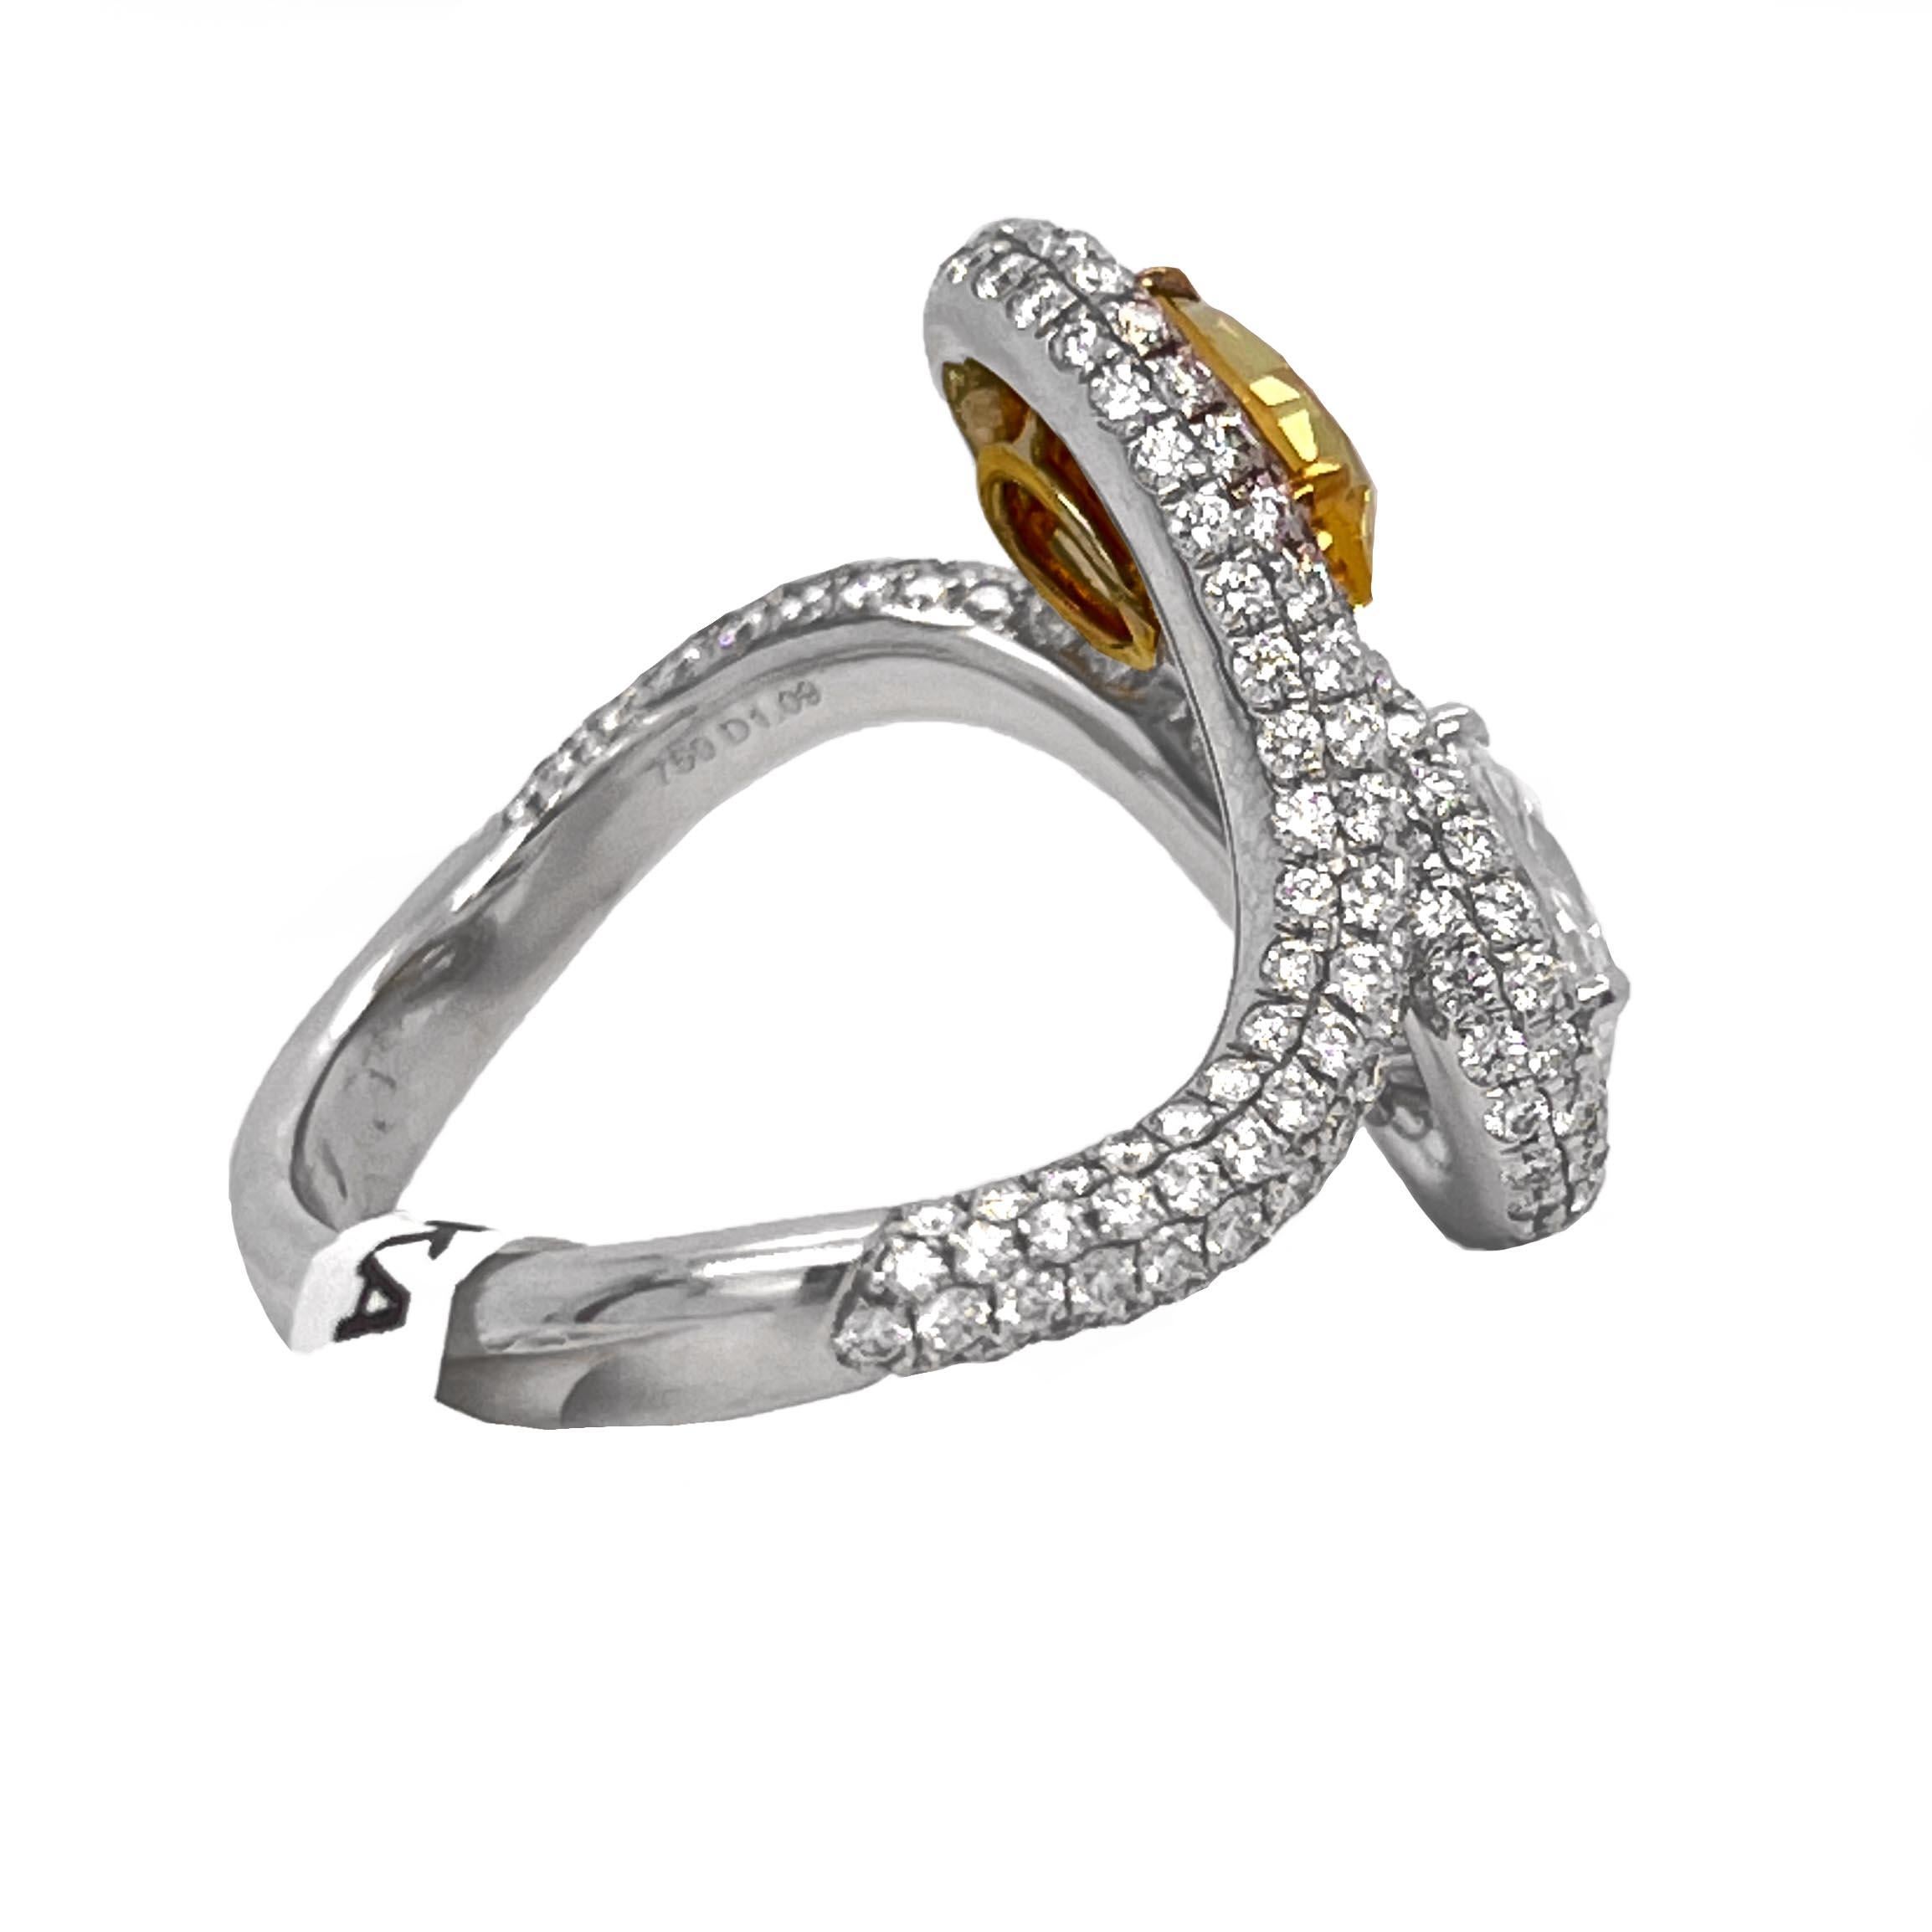 Women's GIA Fancy Intense Yellow and D Internally Flawless Diamond Bypass Ring